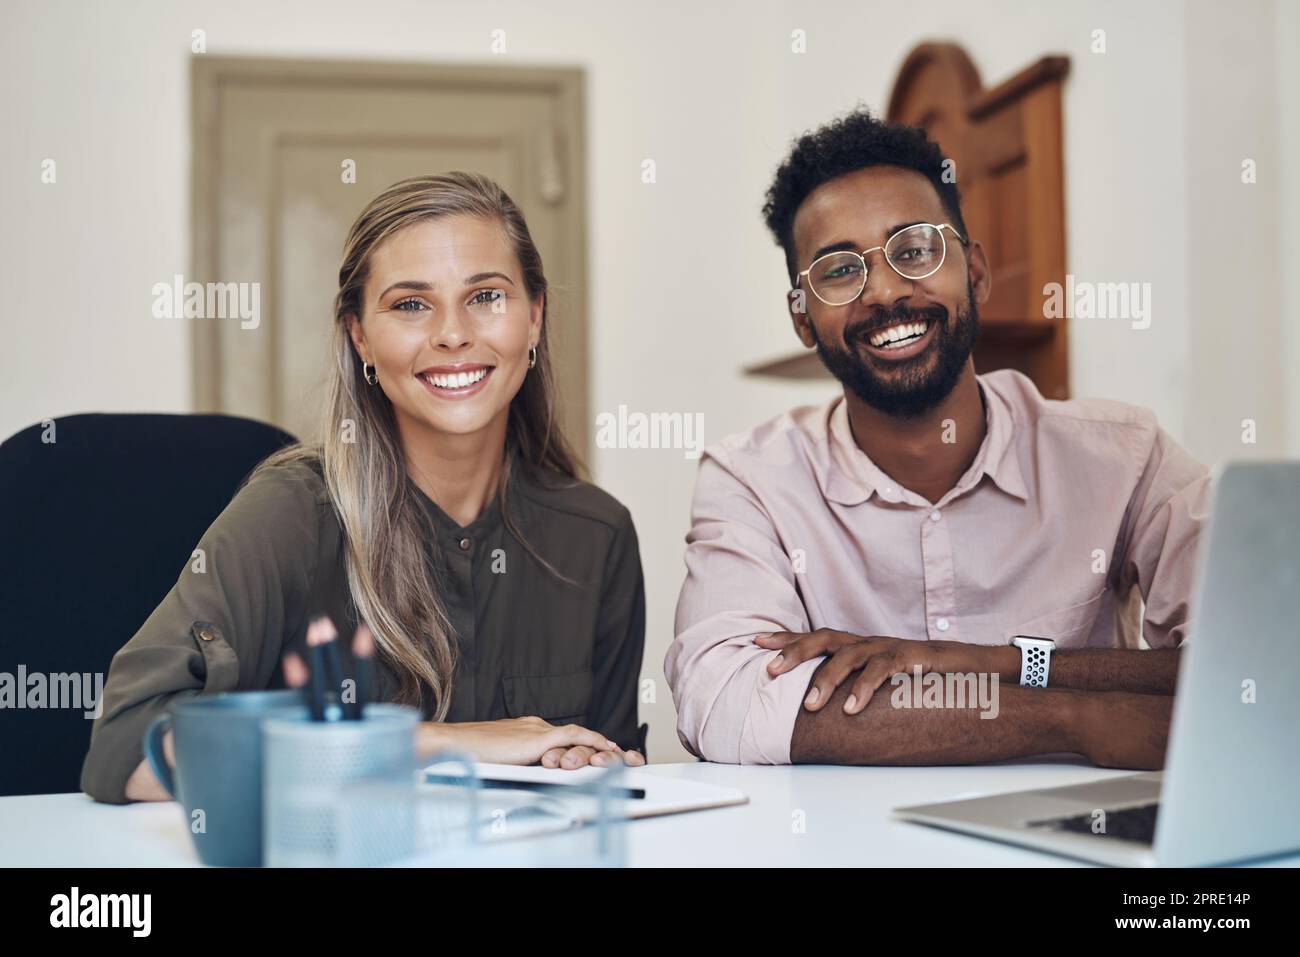 Happy diverse employees working together on a project sitting in an office table satisfied with the partnership. Portrait of young colleagues with a positive mindset smiling about business growth Stock Photo